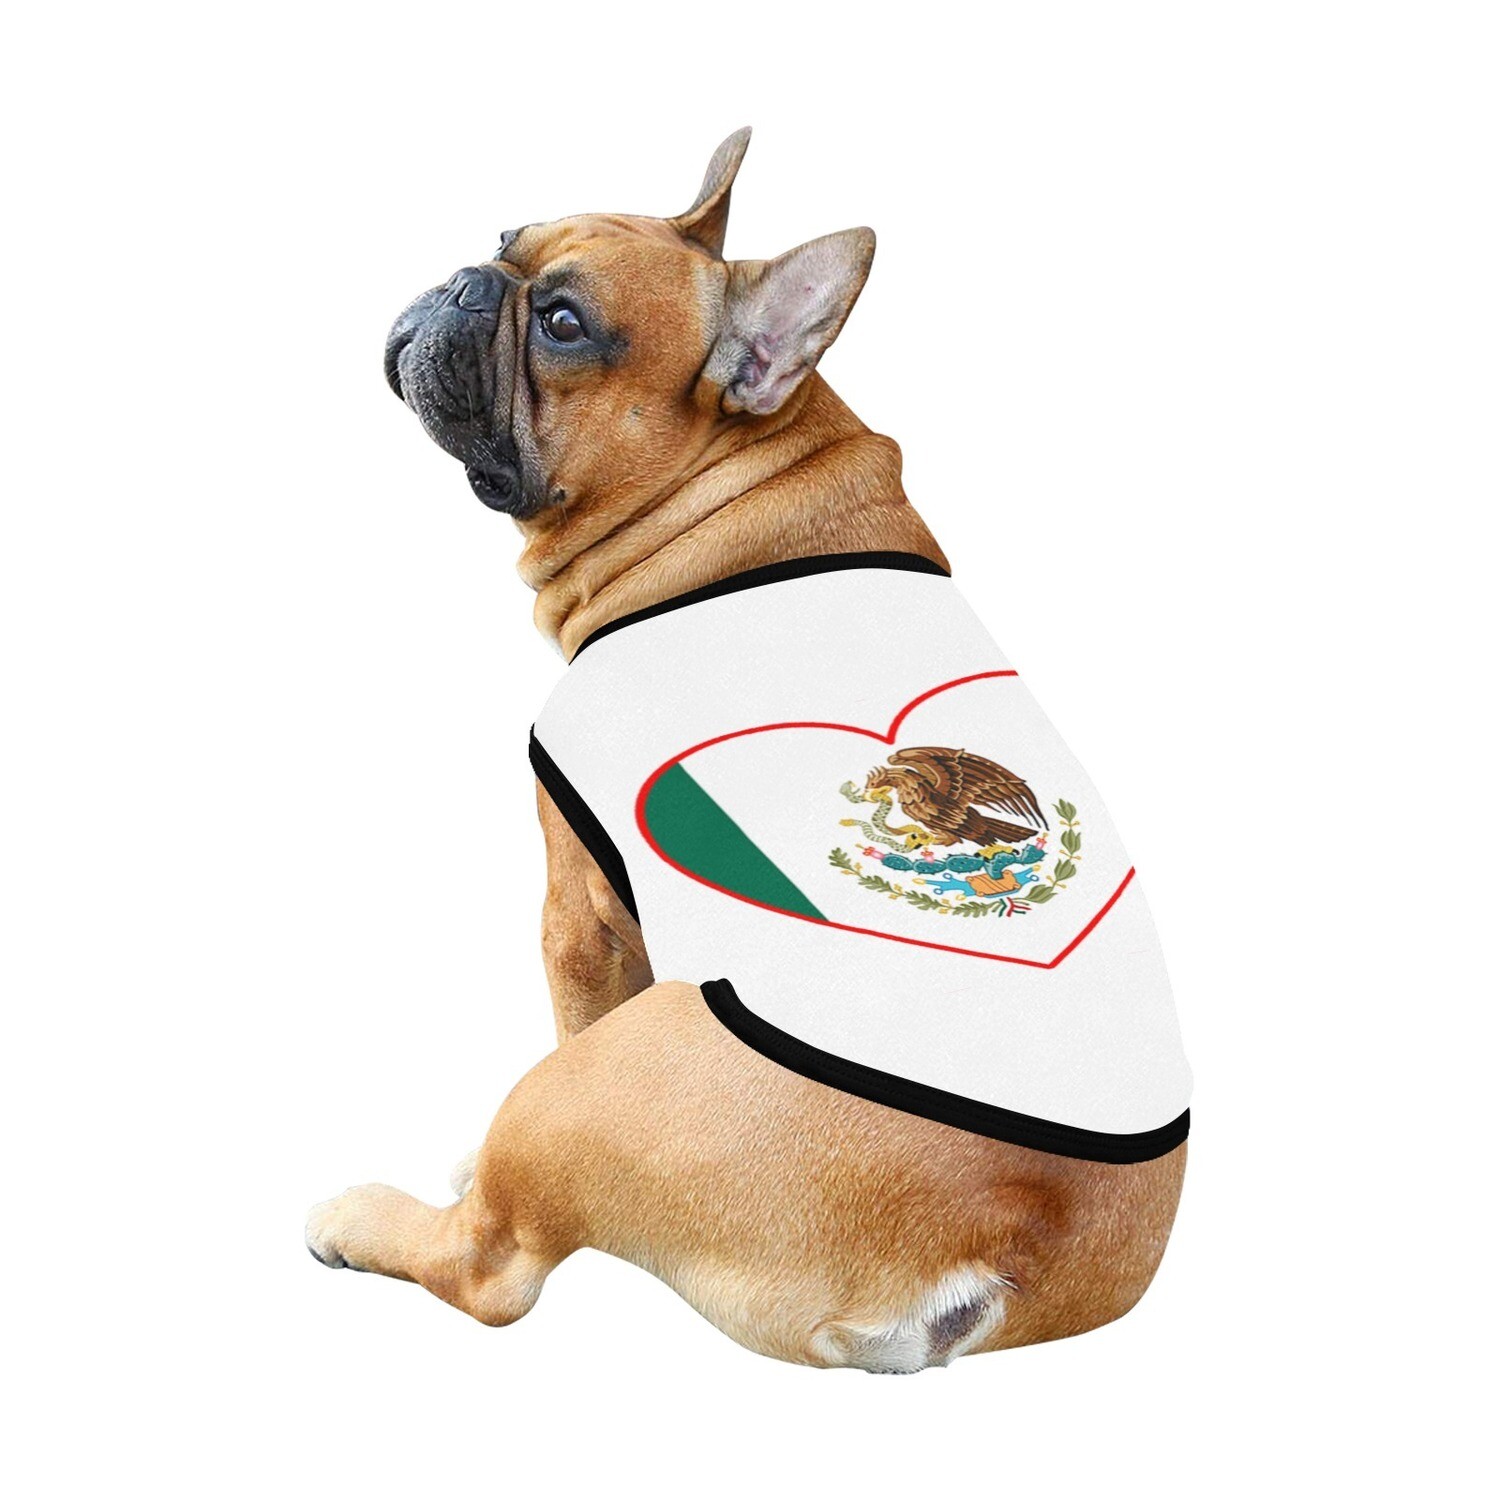 🐕 🇲🇽 I love Mexico dog t-shirt, dog gift, dog tank top, dog shirt, dog clothes, gift, 7 sizes XS to 3XL, Mexican flag, heart shape, white